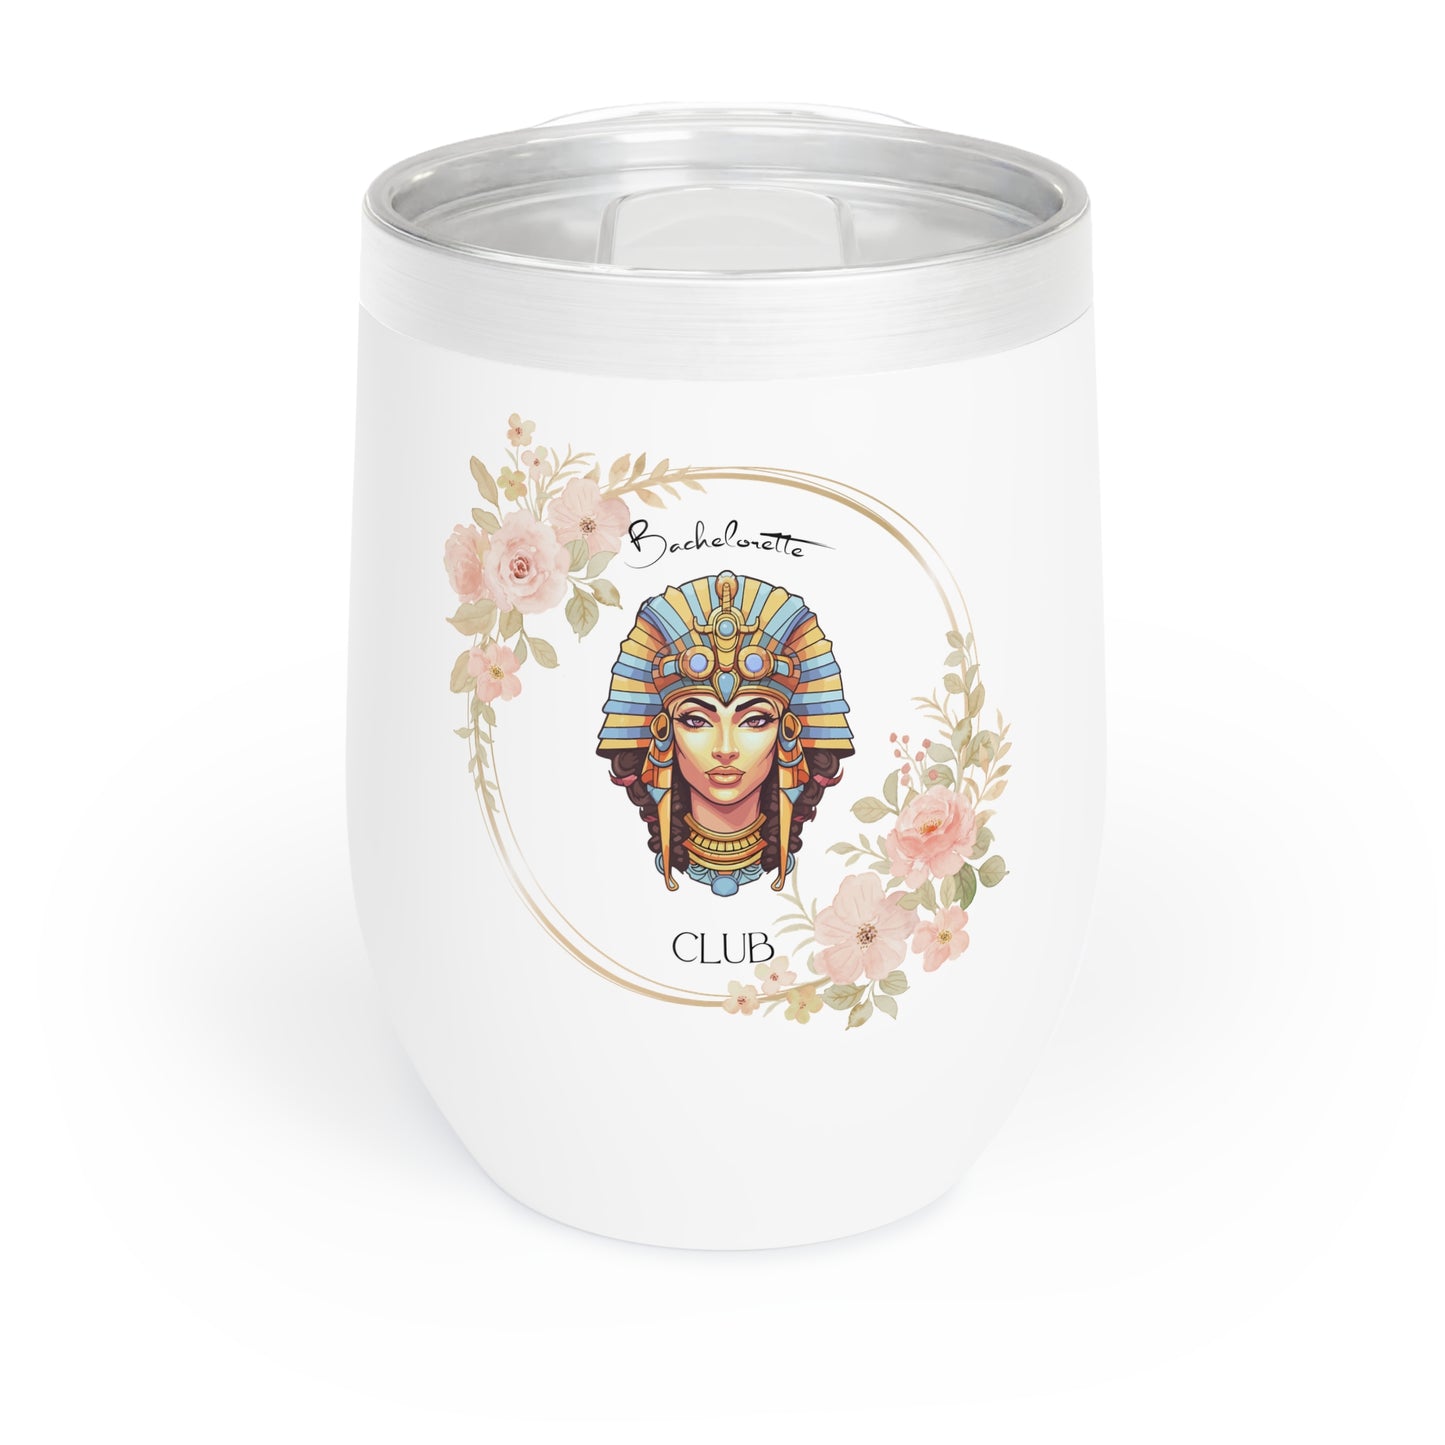 Boho Queen Bachelorette Club Tumbler, Goddess Bachelorette Chill Wine - The Witchy Gypsy